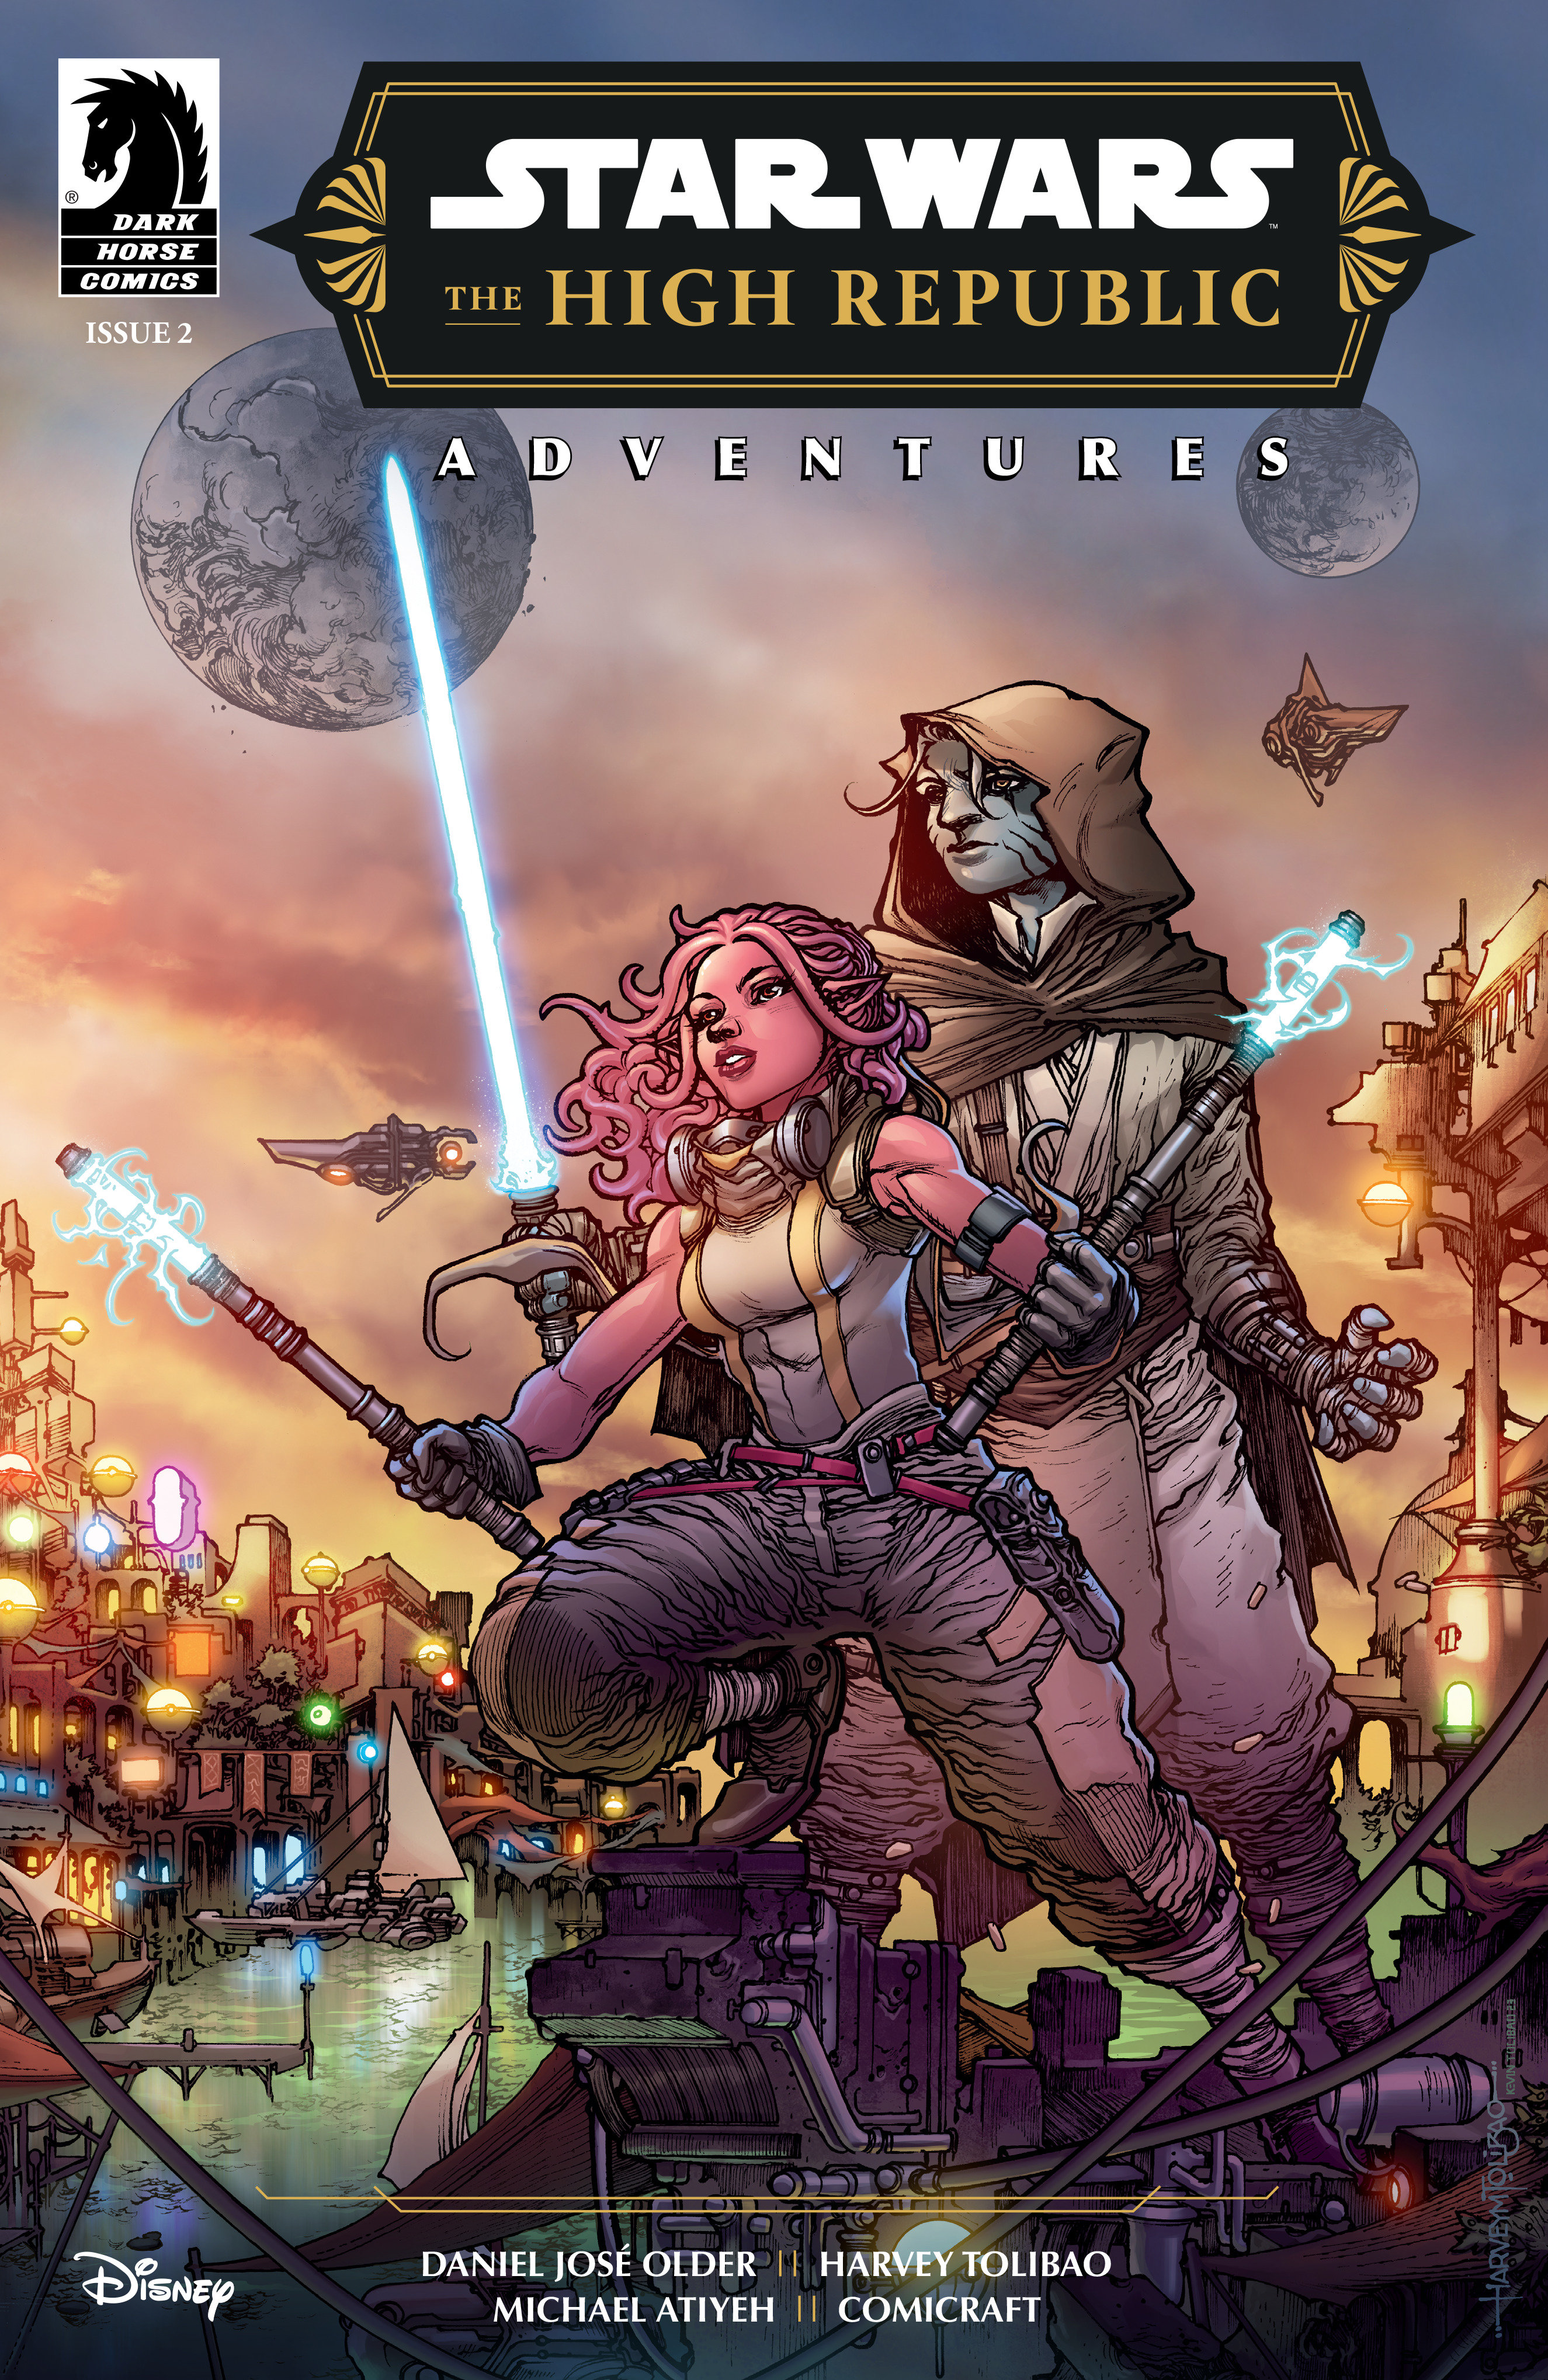 Star Wars: The High Republic Adventures Phase III #2 Cover A (Harvey Tolibao)